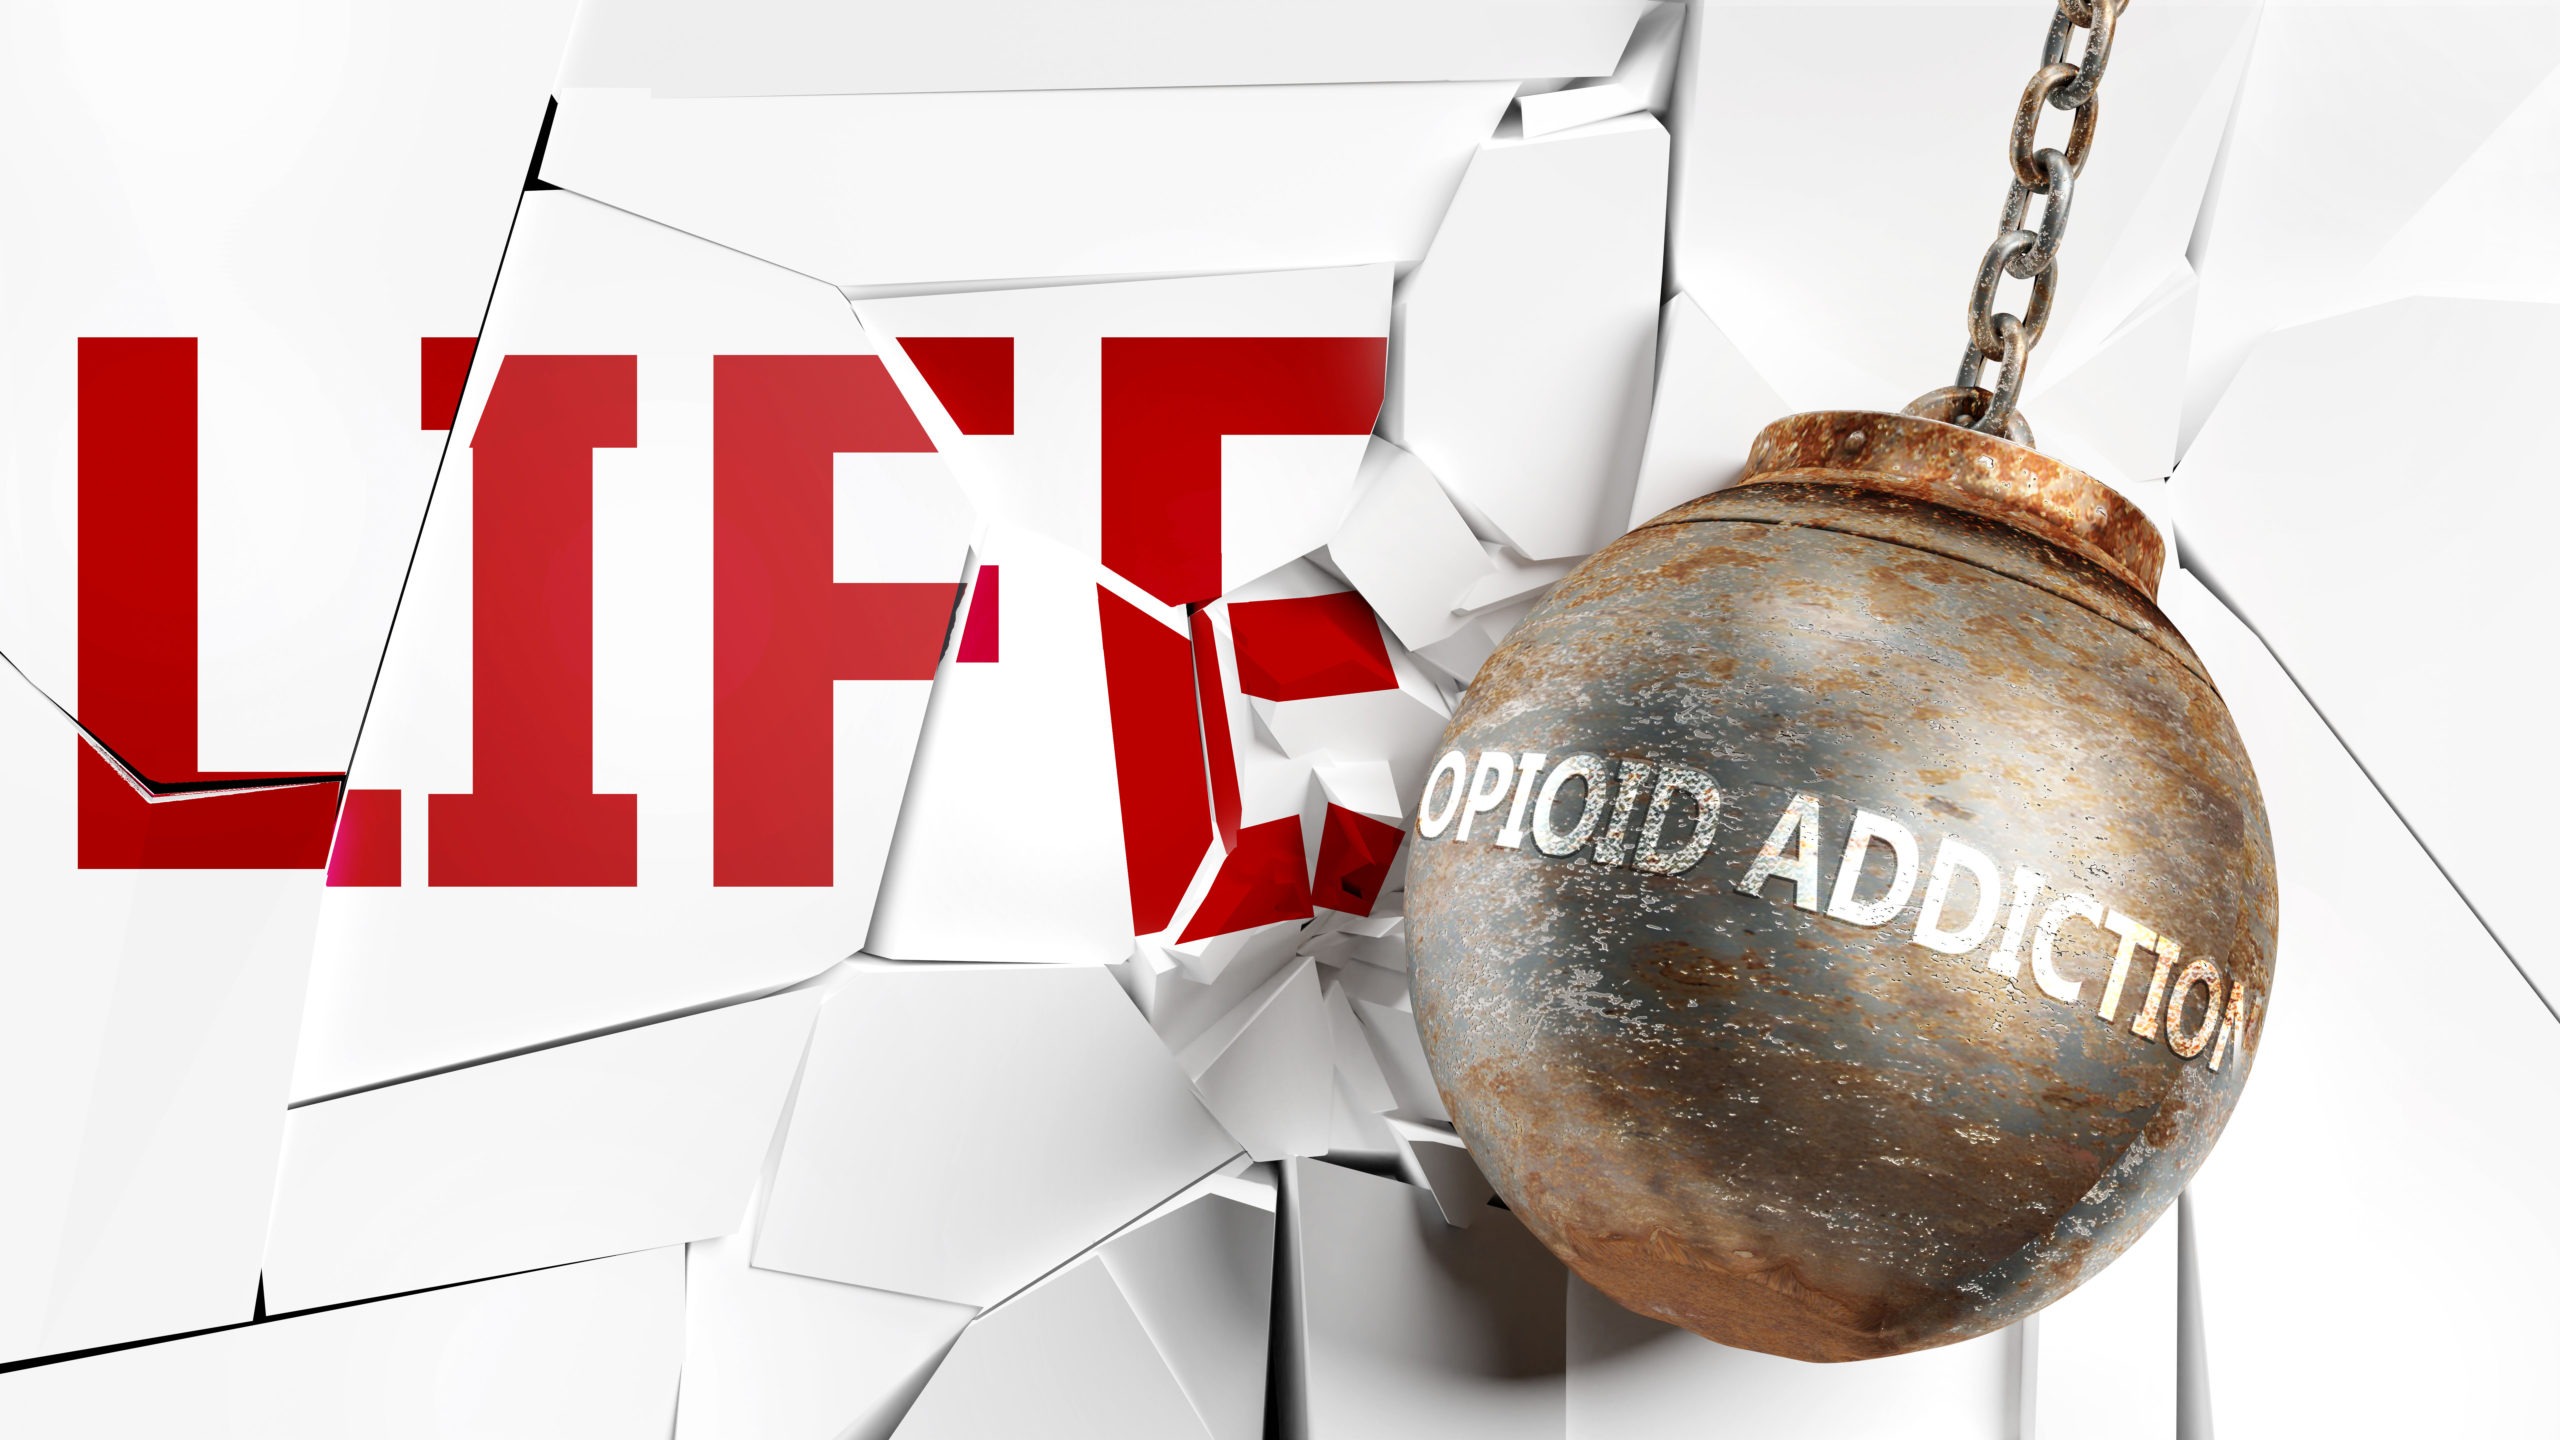 Opioid addiction and life - pictured as a word Opioid addiction and a wreck ball to symbolize that Opioid addiction can have bad effect and can destroy life, 3d illustration